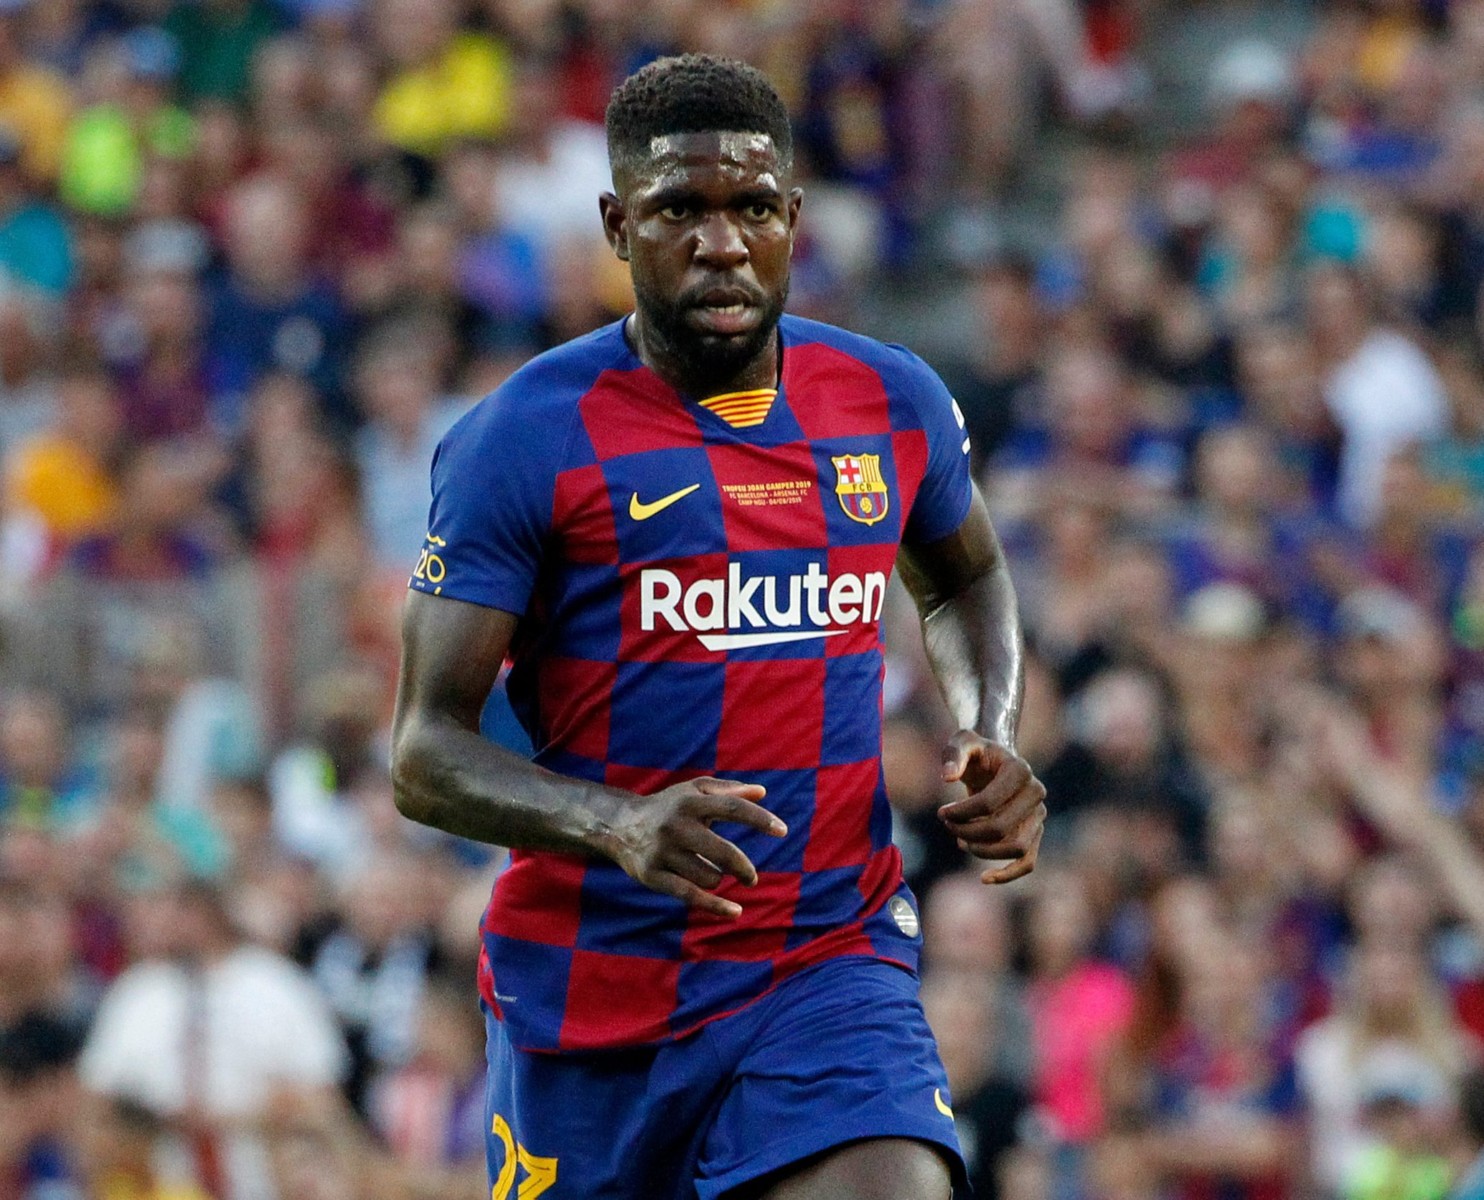 , Arsenal transfer boost as Napoli pull out of race for Samuel Umtiti as they cannot afford Barcelona star’s £45m fee